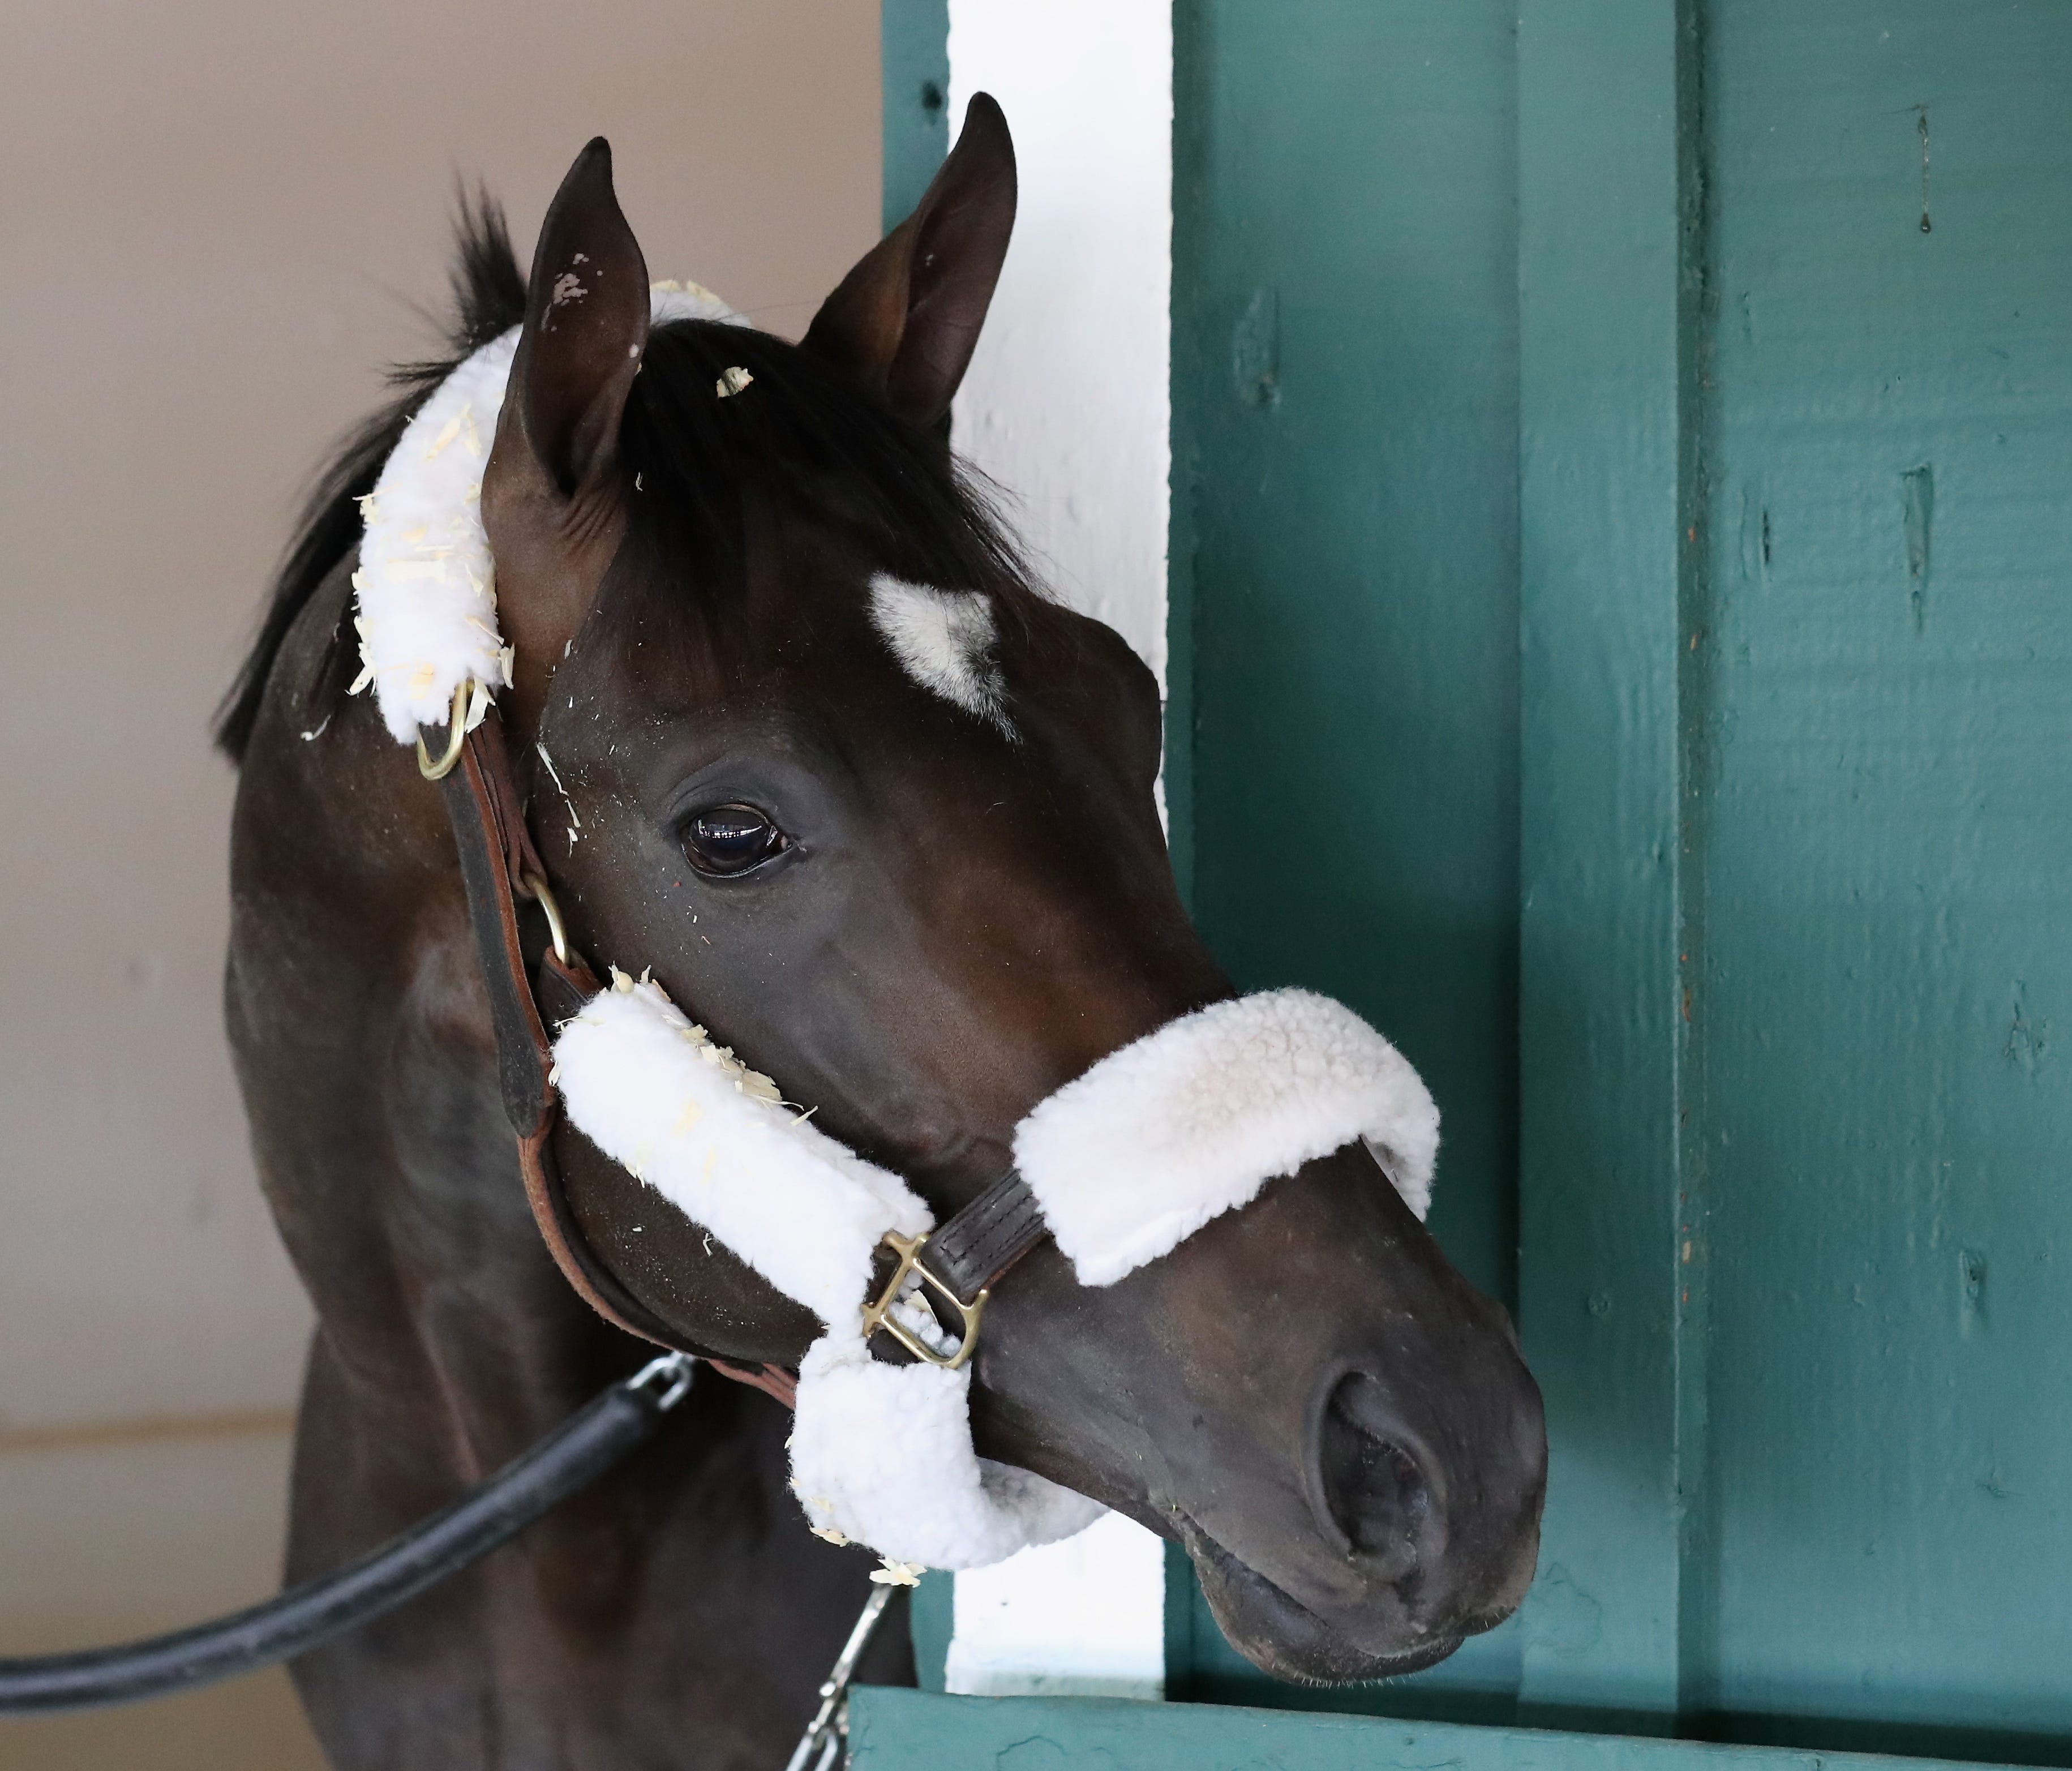 Kentucky Derby winner Always Dreaming looks out from his stall after arriving at Pimlico Race Course for the upcoming Preakness Stakes on May 9, 2017 in Baltimore, Maryland.